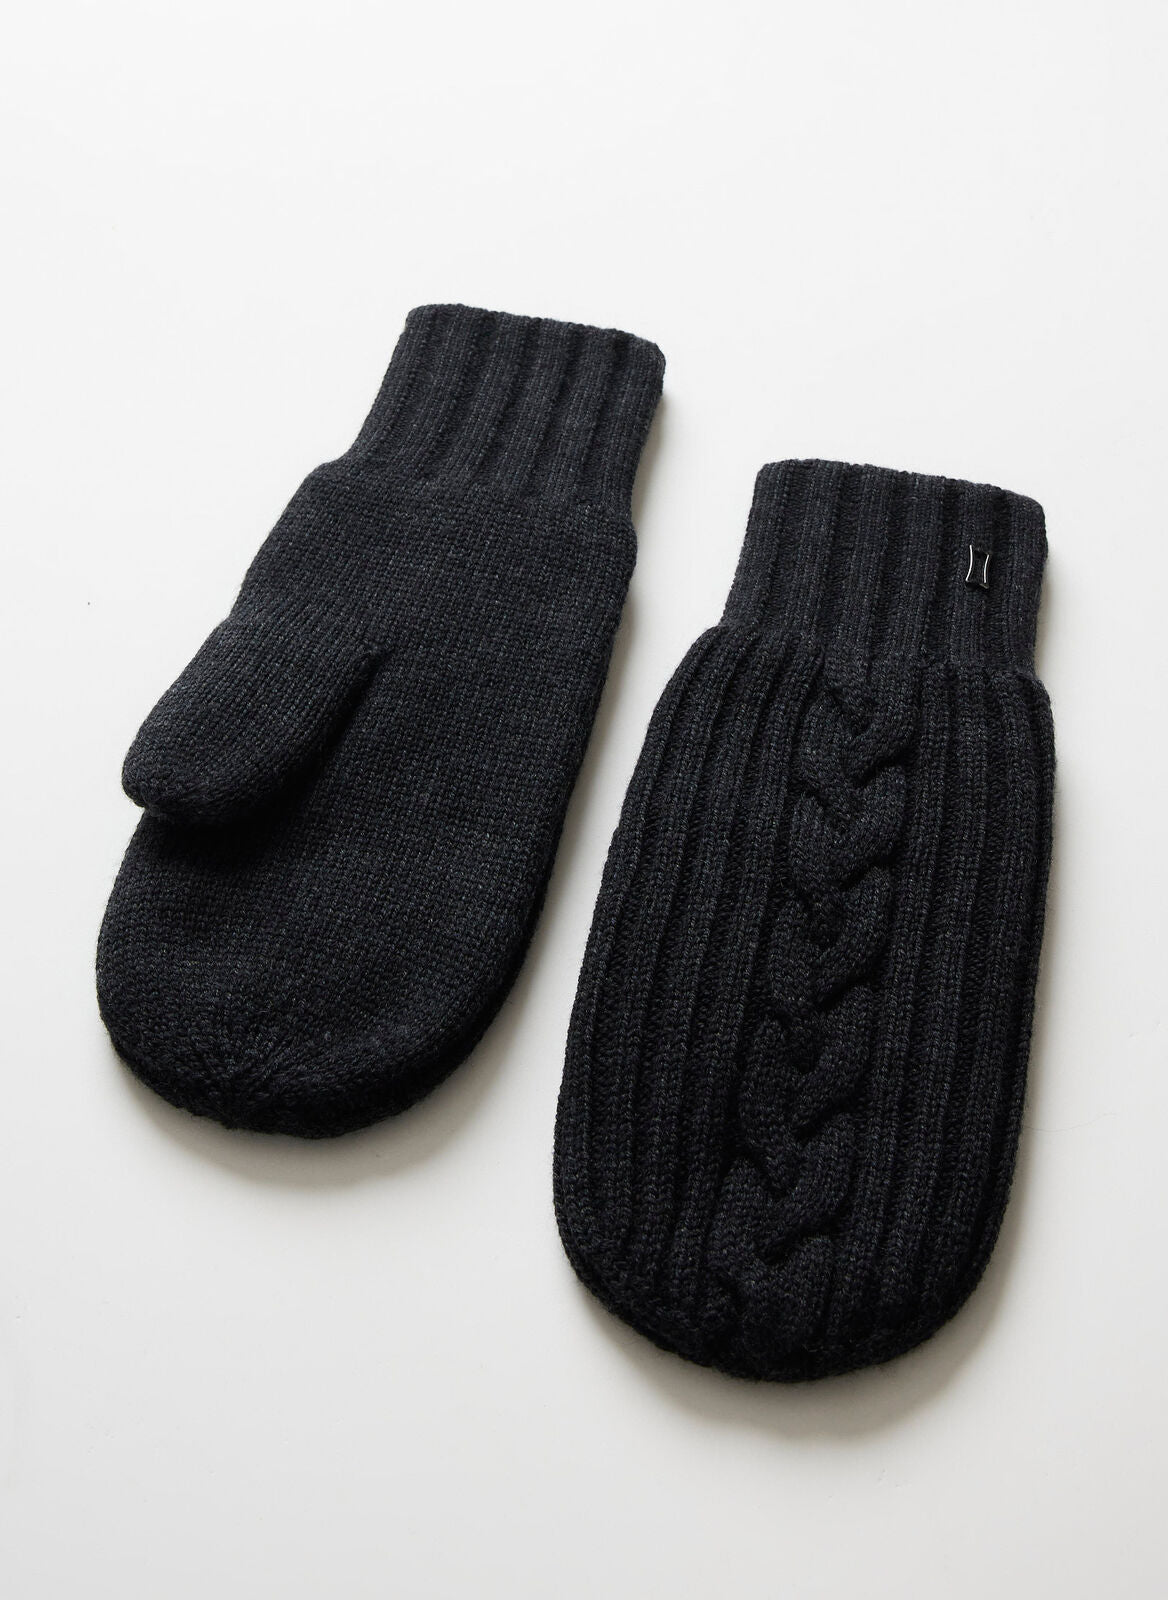 Kit and Ace — Cableknit Merino Mitten